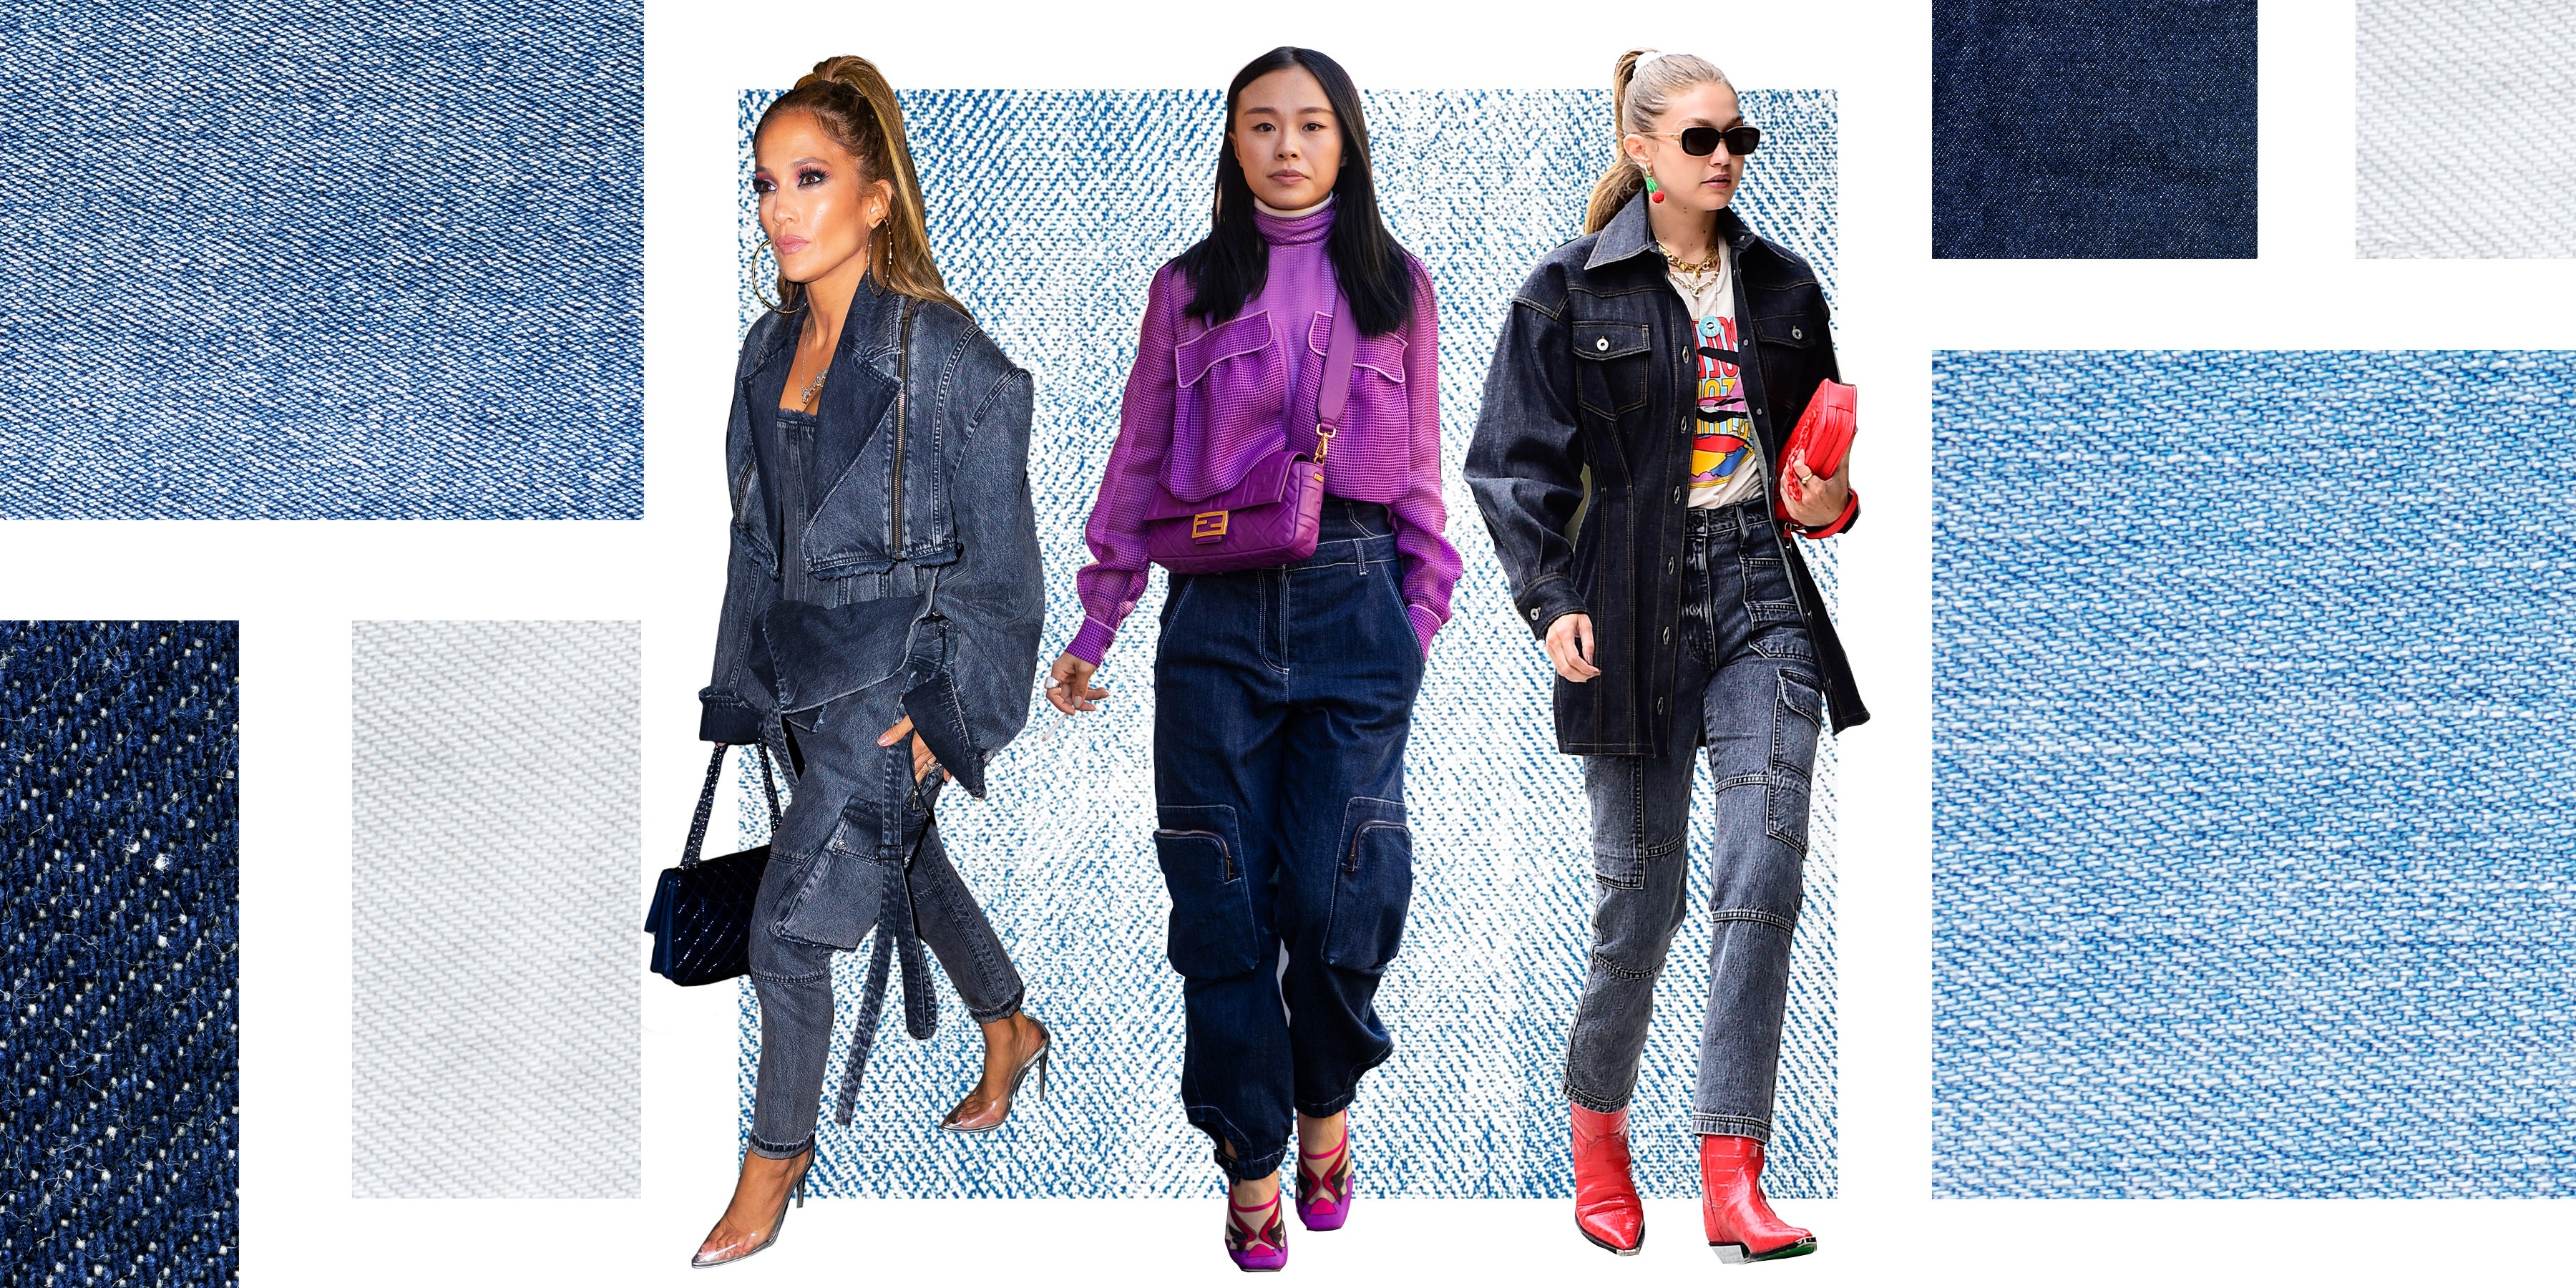 Take a look at 5 jeans trends that dominate the current women's fashion playground